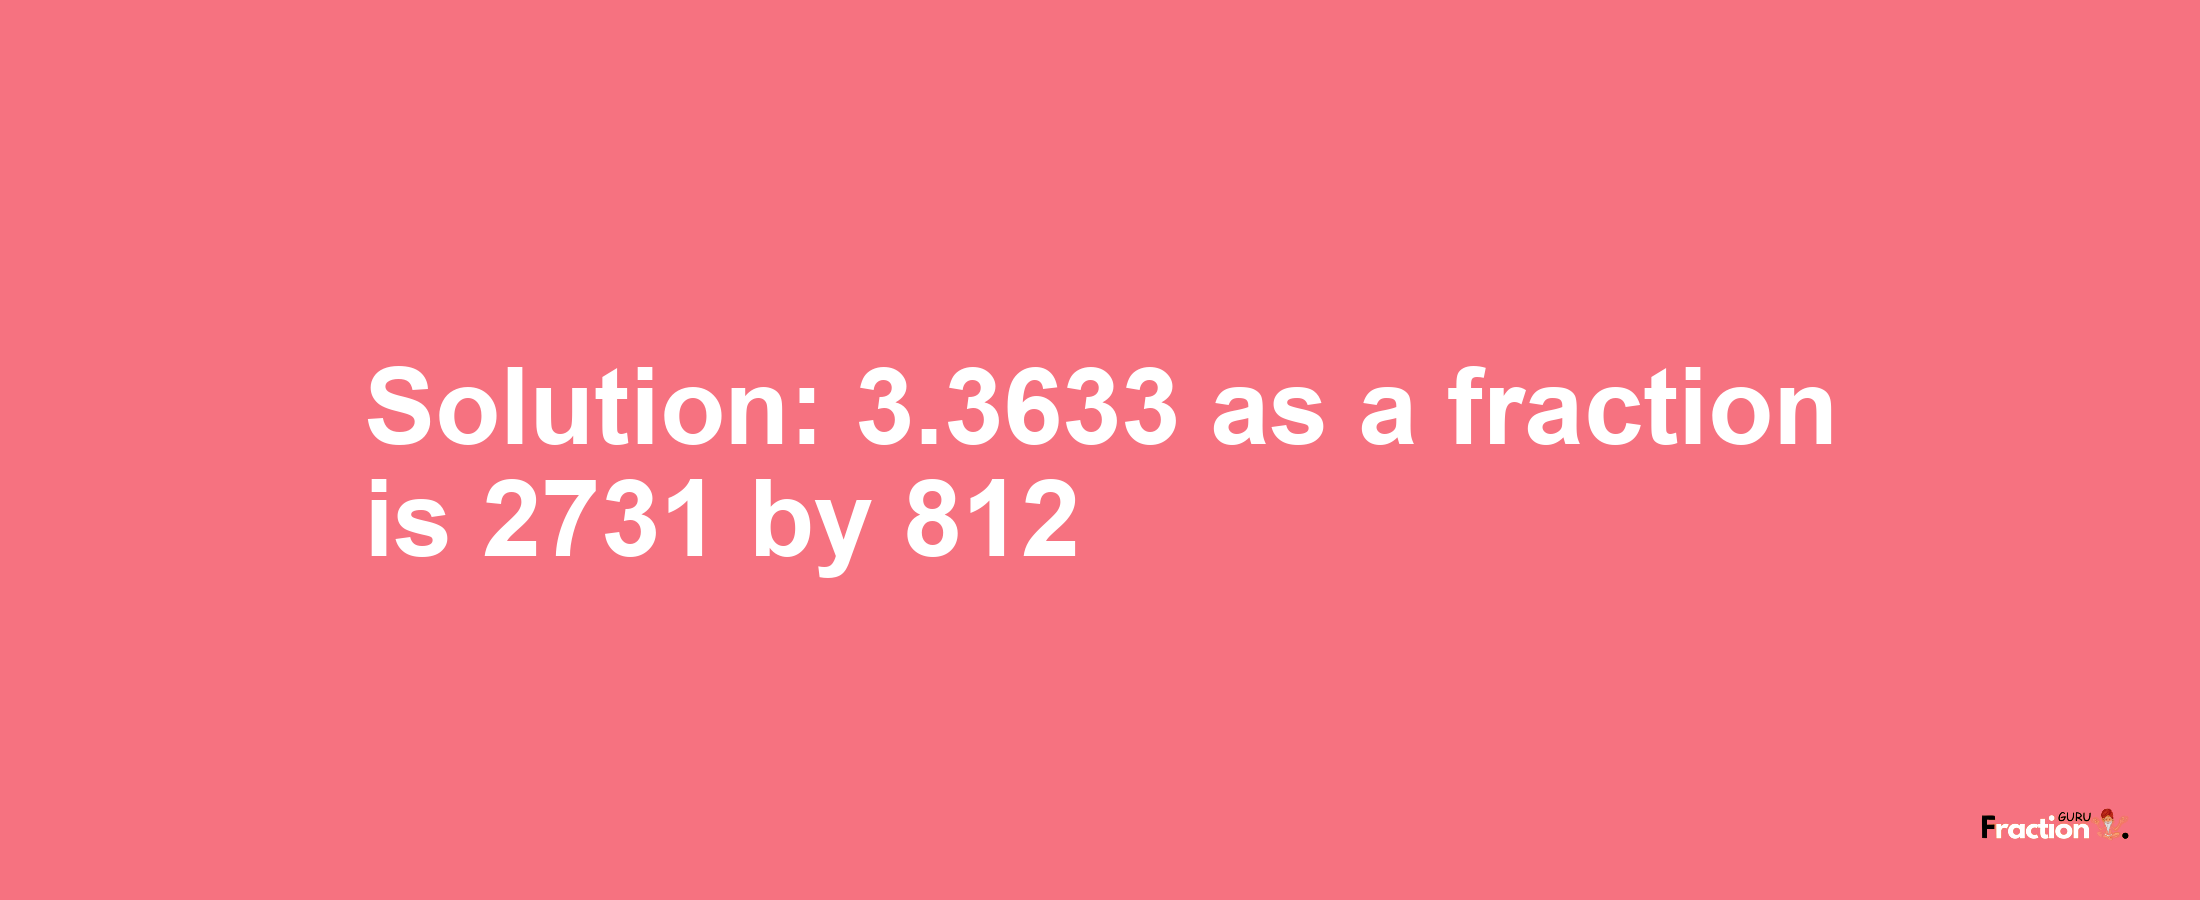 Solution:3.3633 as a fraction is 2731/812